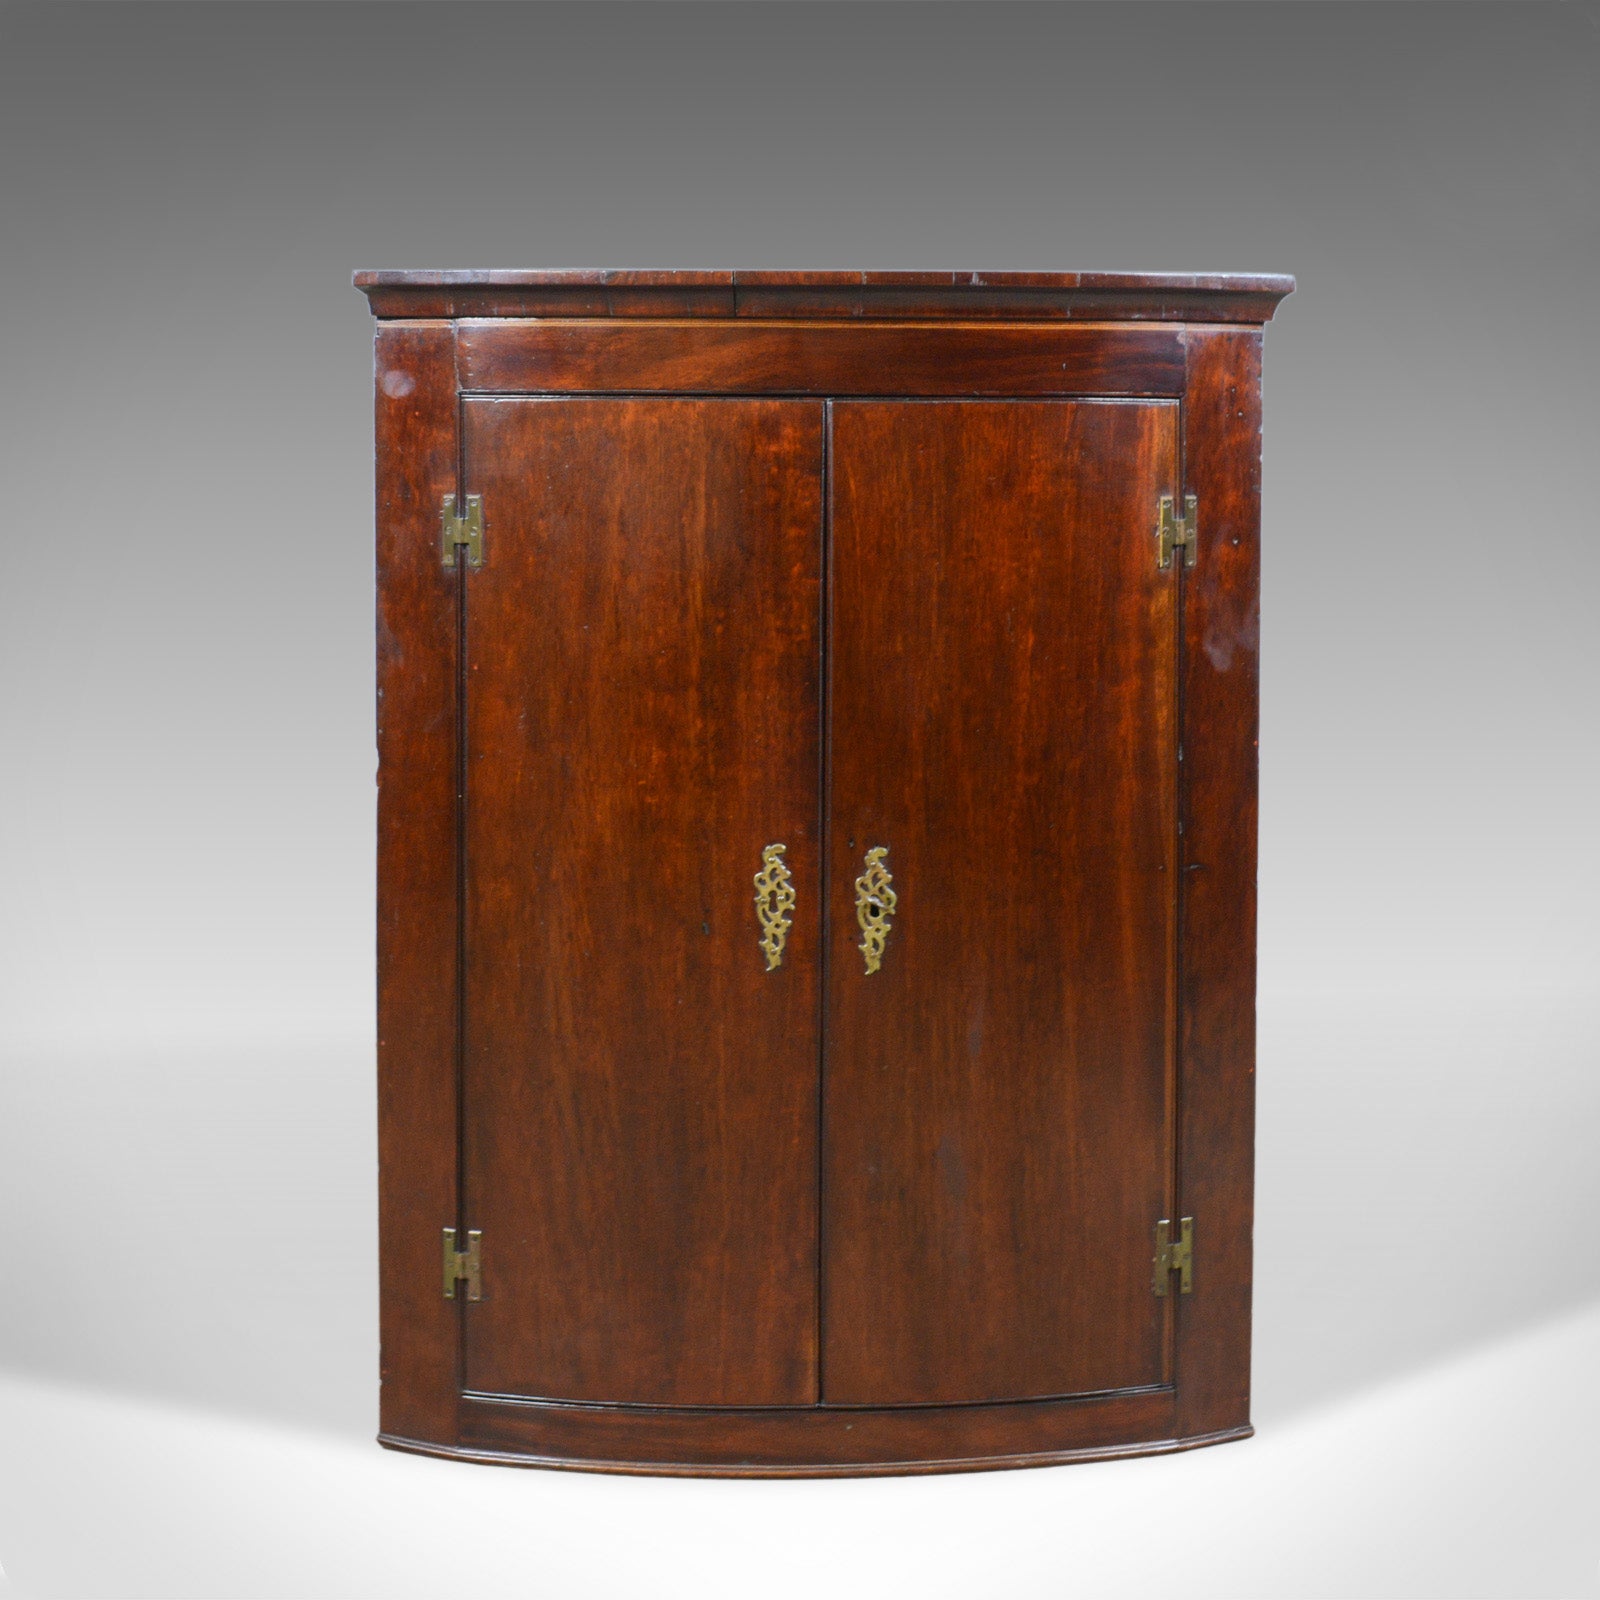 Antique Corner Cabinet Late Georgian Bow Fronted Mahogany